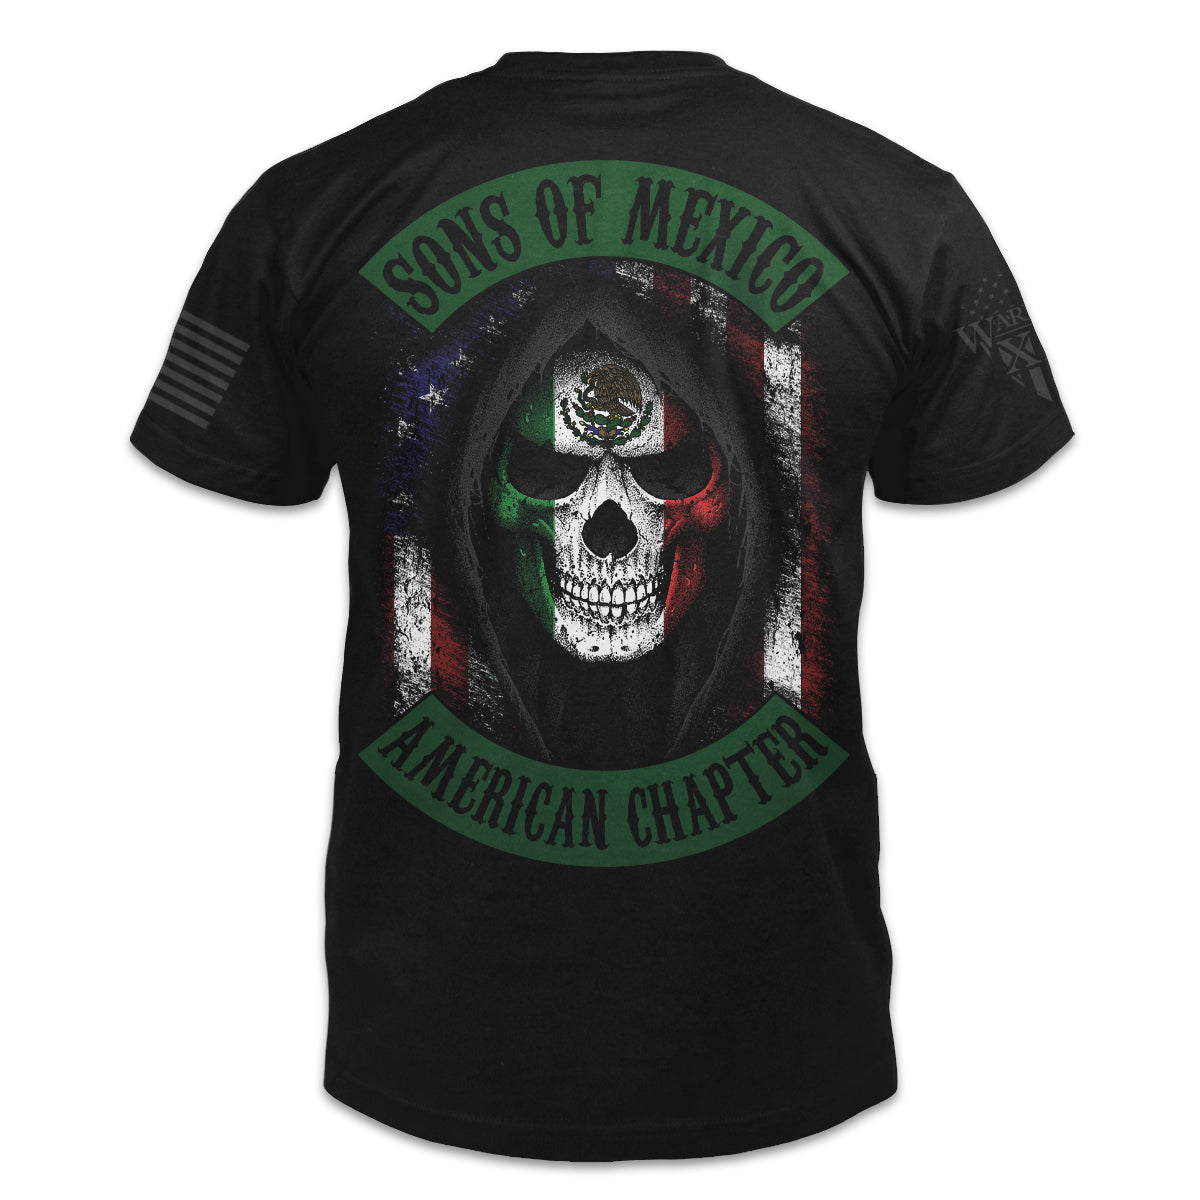 A black t-shirt with the words "Sons of Mexico - American Chapter" with a hooded Mexican skeleton with an American flag behind printed on the back of the shirt.